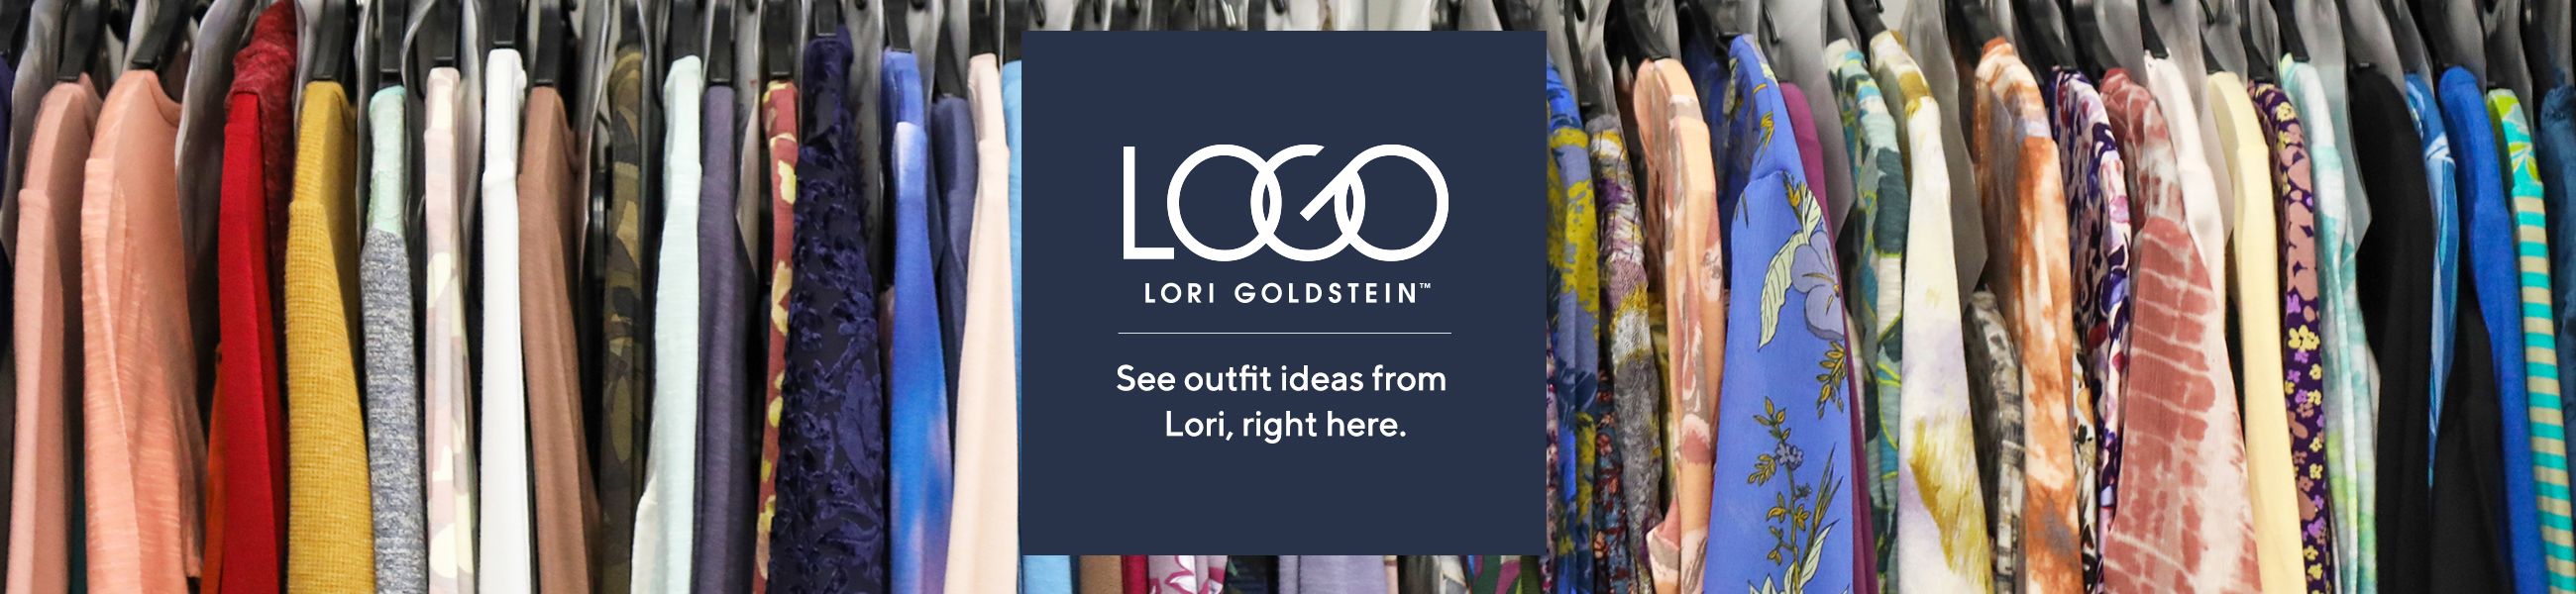 LOGO Lori Goldstein. See outfit ideas from Lori, right here.